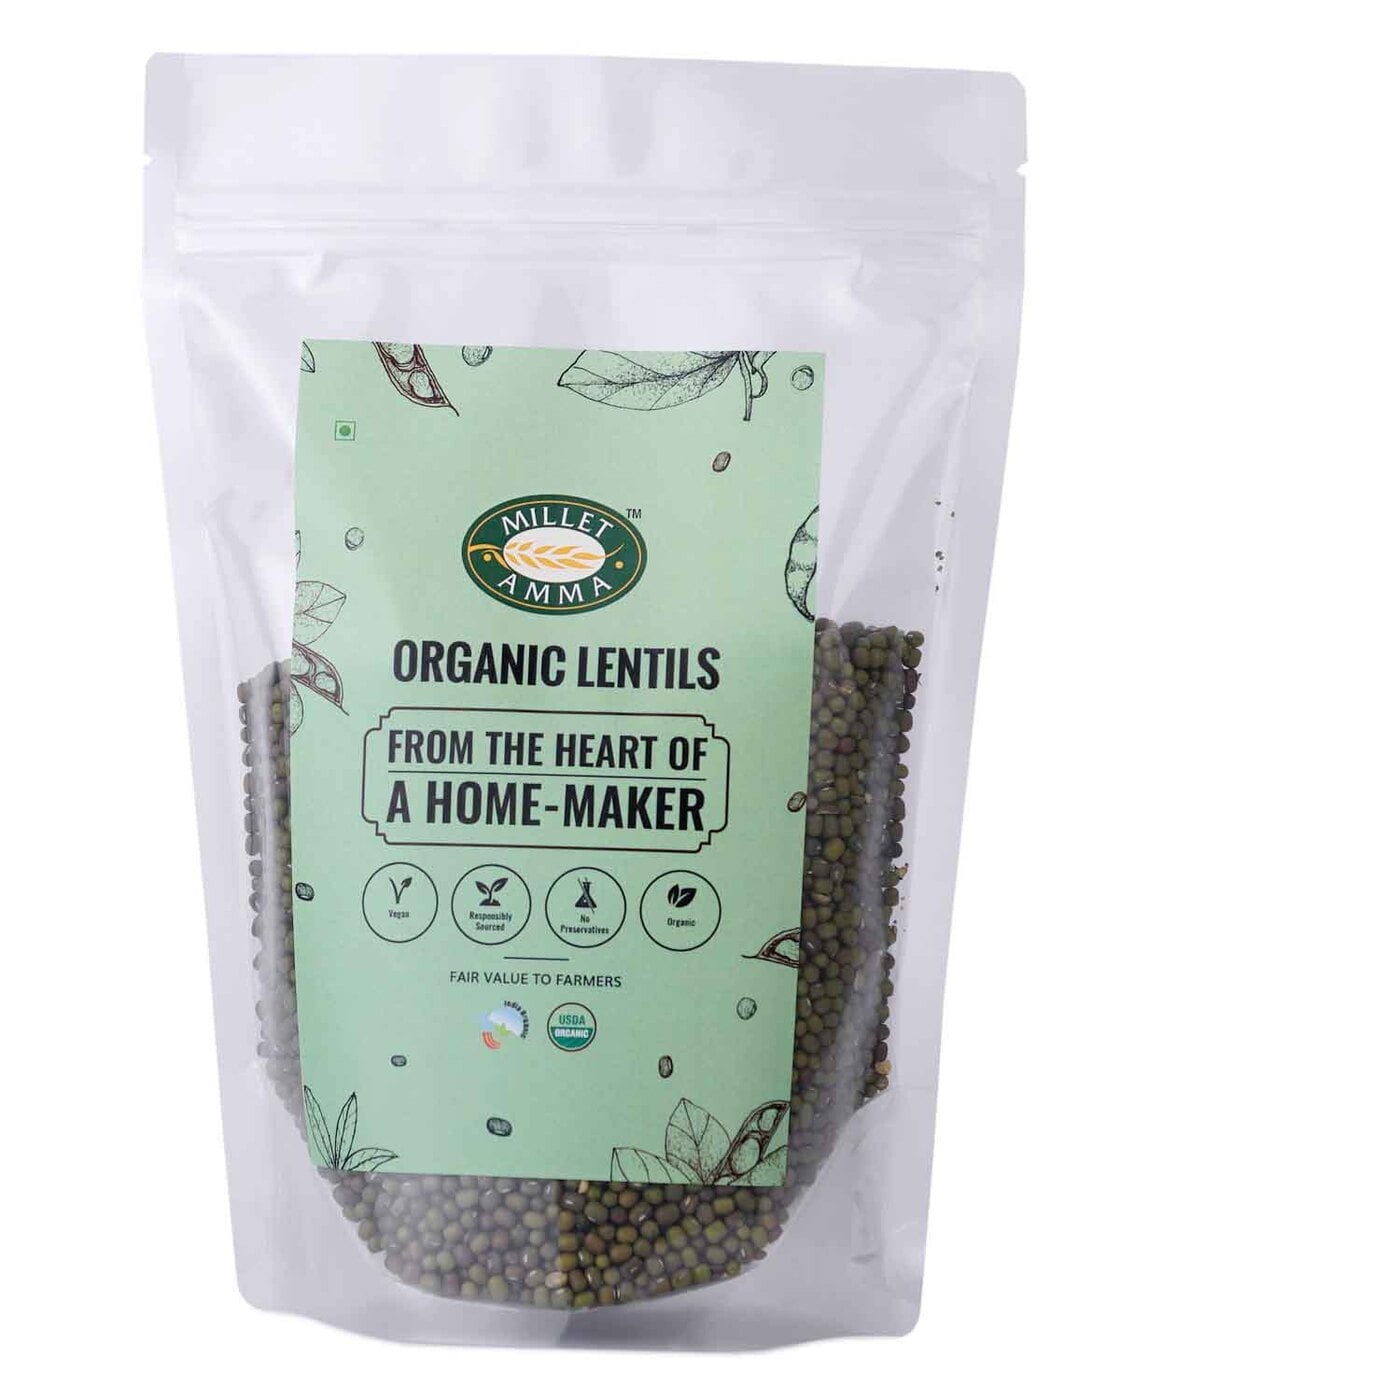 Milletamma’s Green Gram Dal helps to reduce weight and fights obesity.  It has magnesium that eases blood flow in the blood vessels and lowers hypertension.  It is anti-microbial that helps to fight harmful bacteria and viruses.  It adds shine and radiance to human skin.